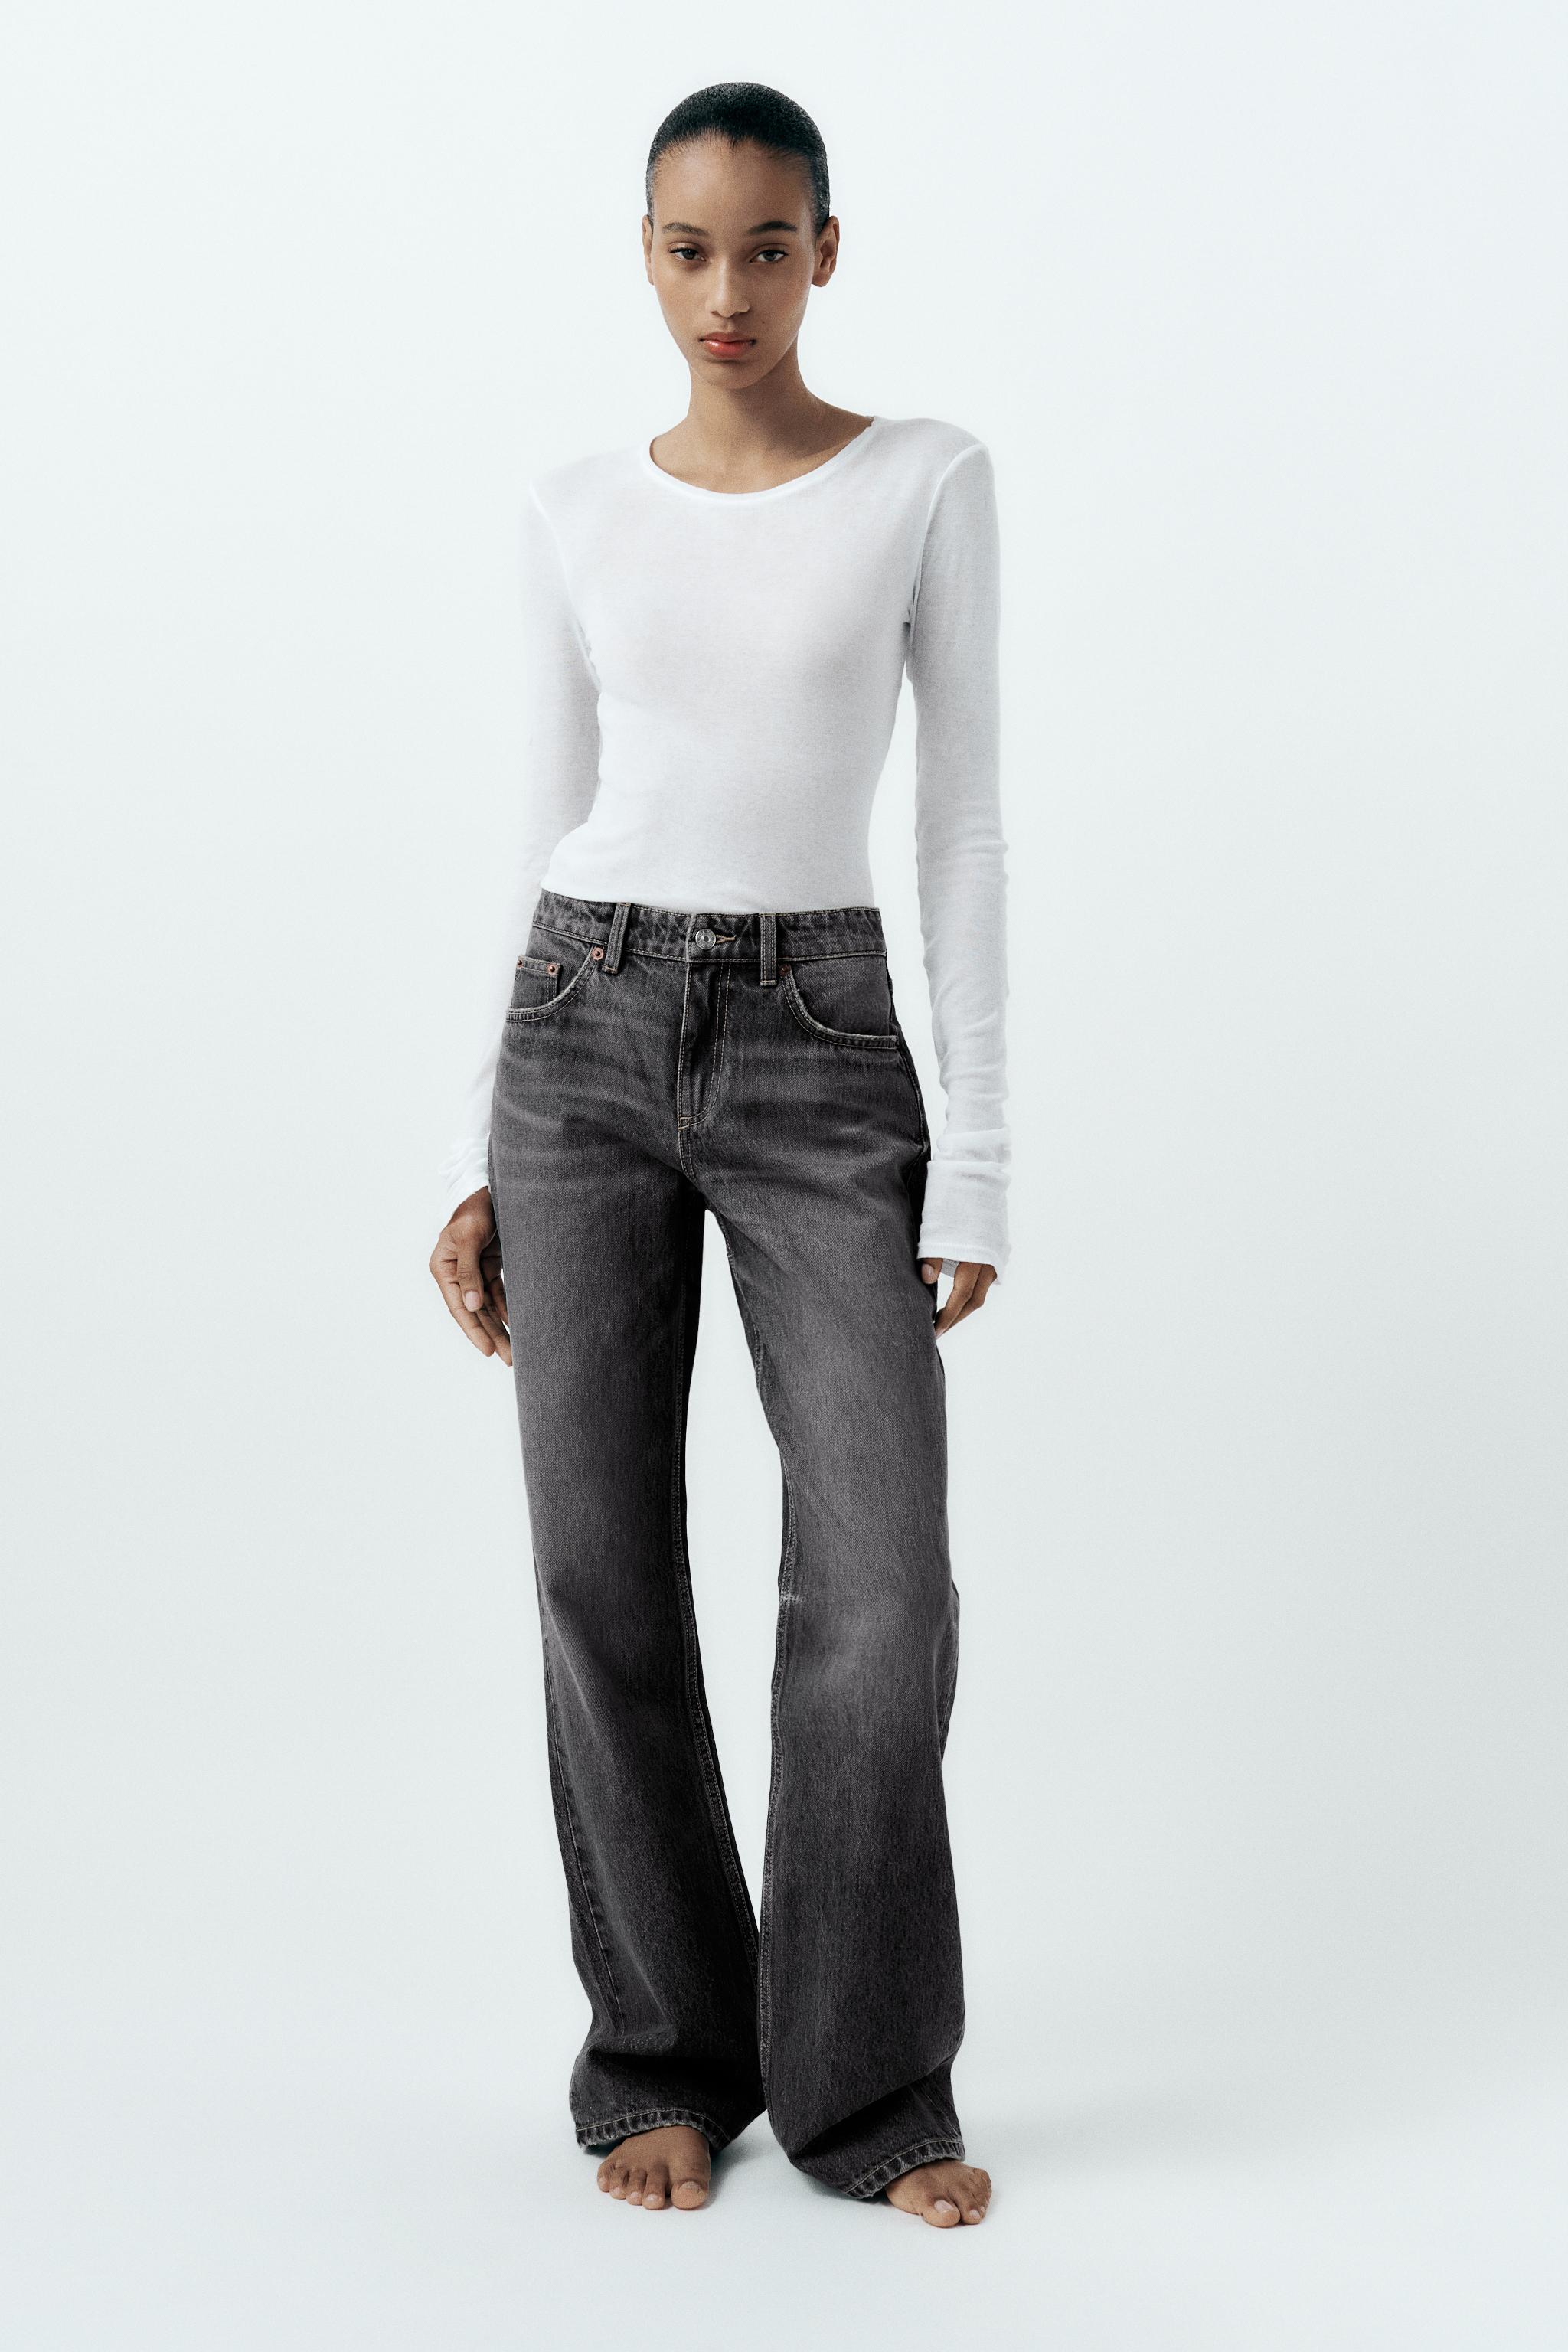 TRF LOW RISE STRAIGHT CUT JEANS - Anthracite grey | ZARA United States